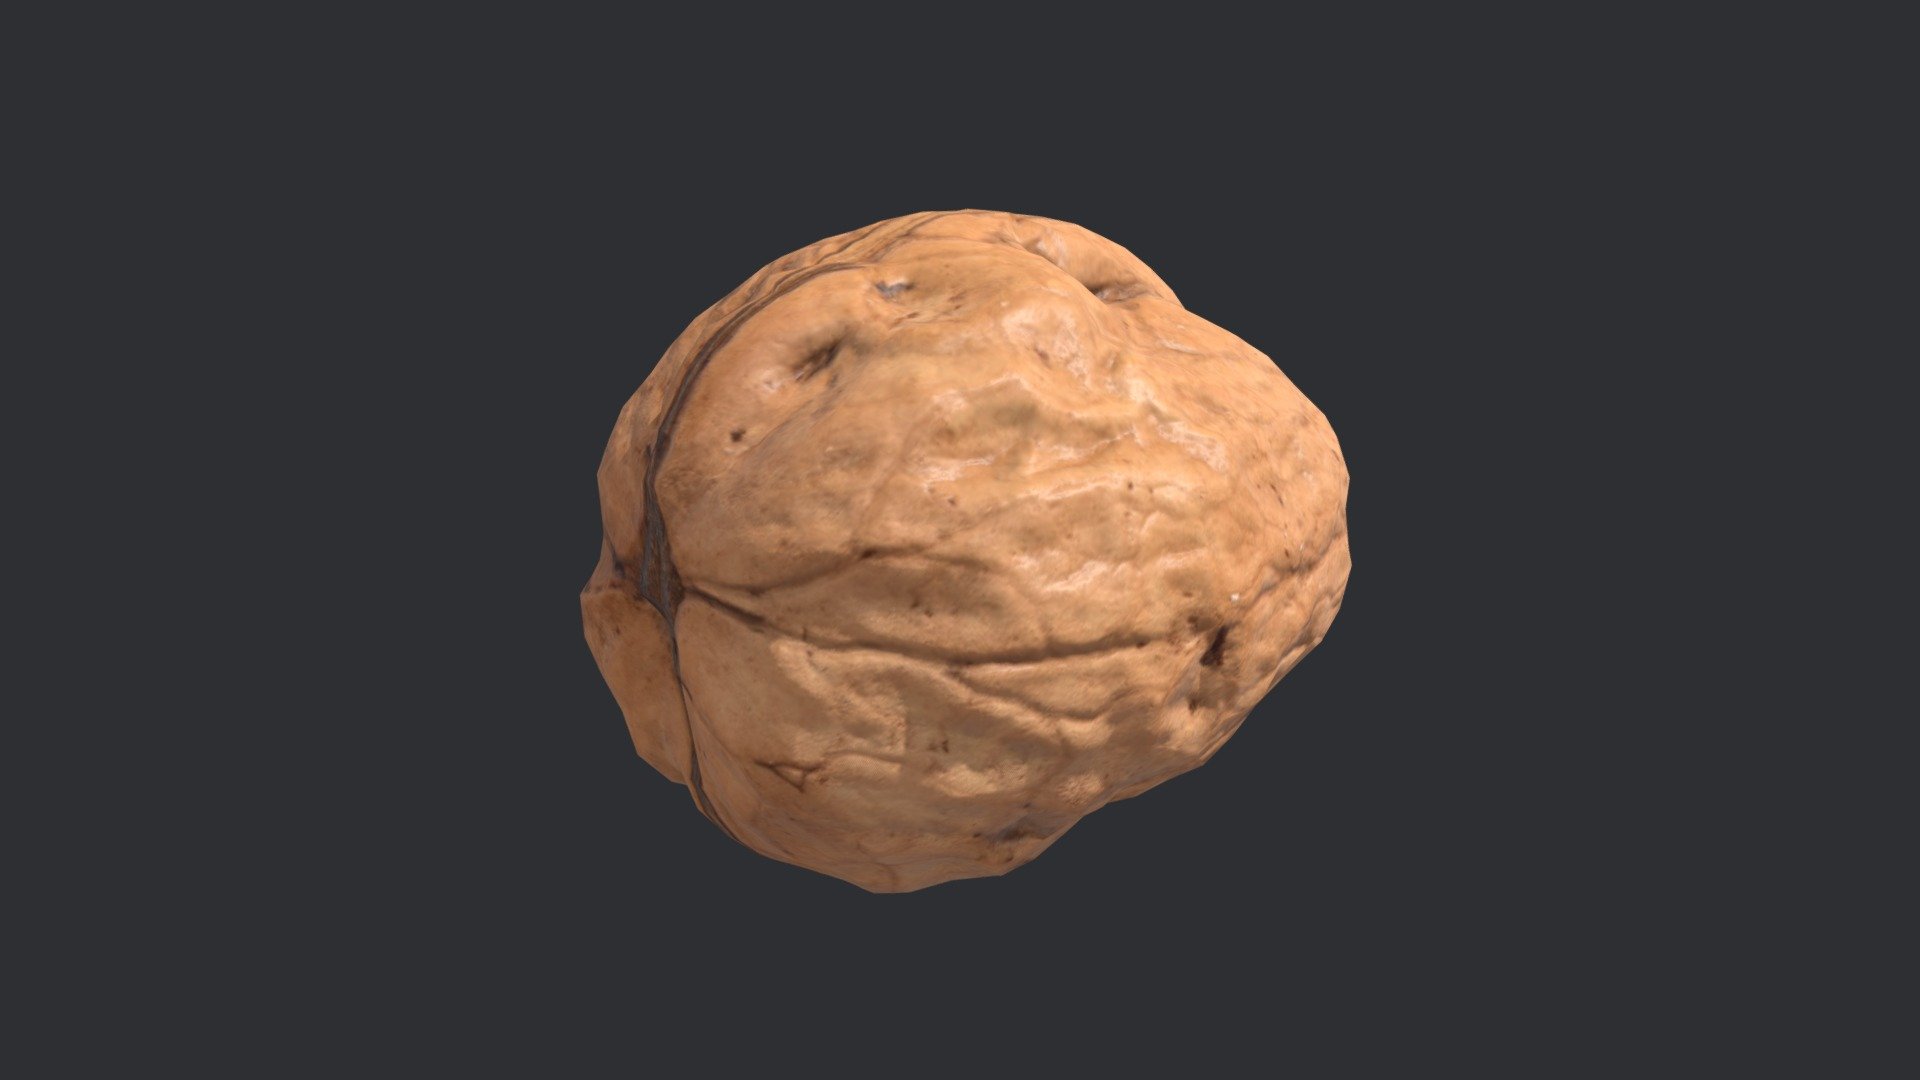 Photogrammetry model of an unshelled walnut.

The model has three base levels of detail, optimized into uniform triangles with clean UVs.

Lod 1 = 32,000 tris,

Lod 2 = 2,000 tris,

Lod 3 = 500 tris.

The model has 4K PNG textures (Albedo, Normal, Ambient Occlusion, Roughness and Gloss). All levels of detail share the same textures except for the Normal, where each LOD has a unique Normal map.

Lod 2 used for 3D preview with 1K JPG textures.

Real world scale 3d model